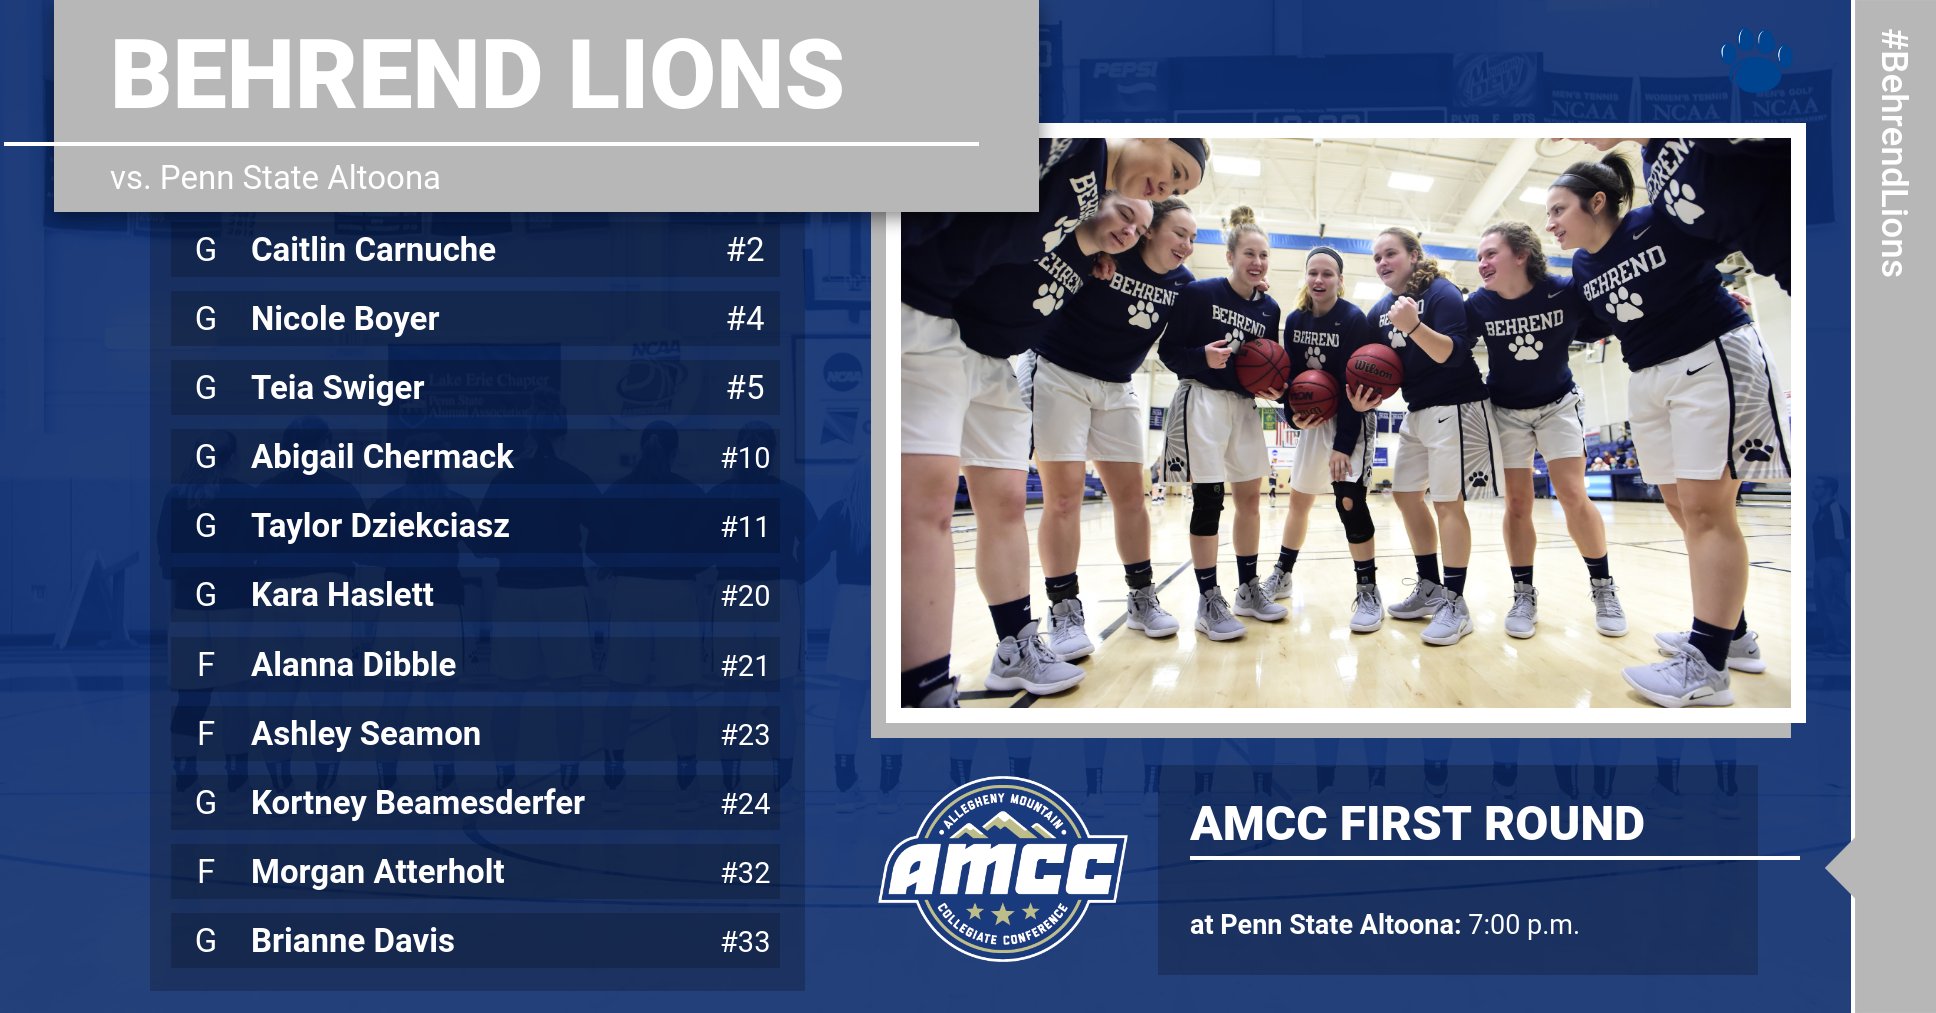 Lions Battle Penn State Altoona for First Round of AMCC Playoffs